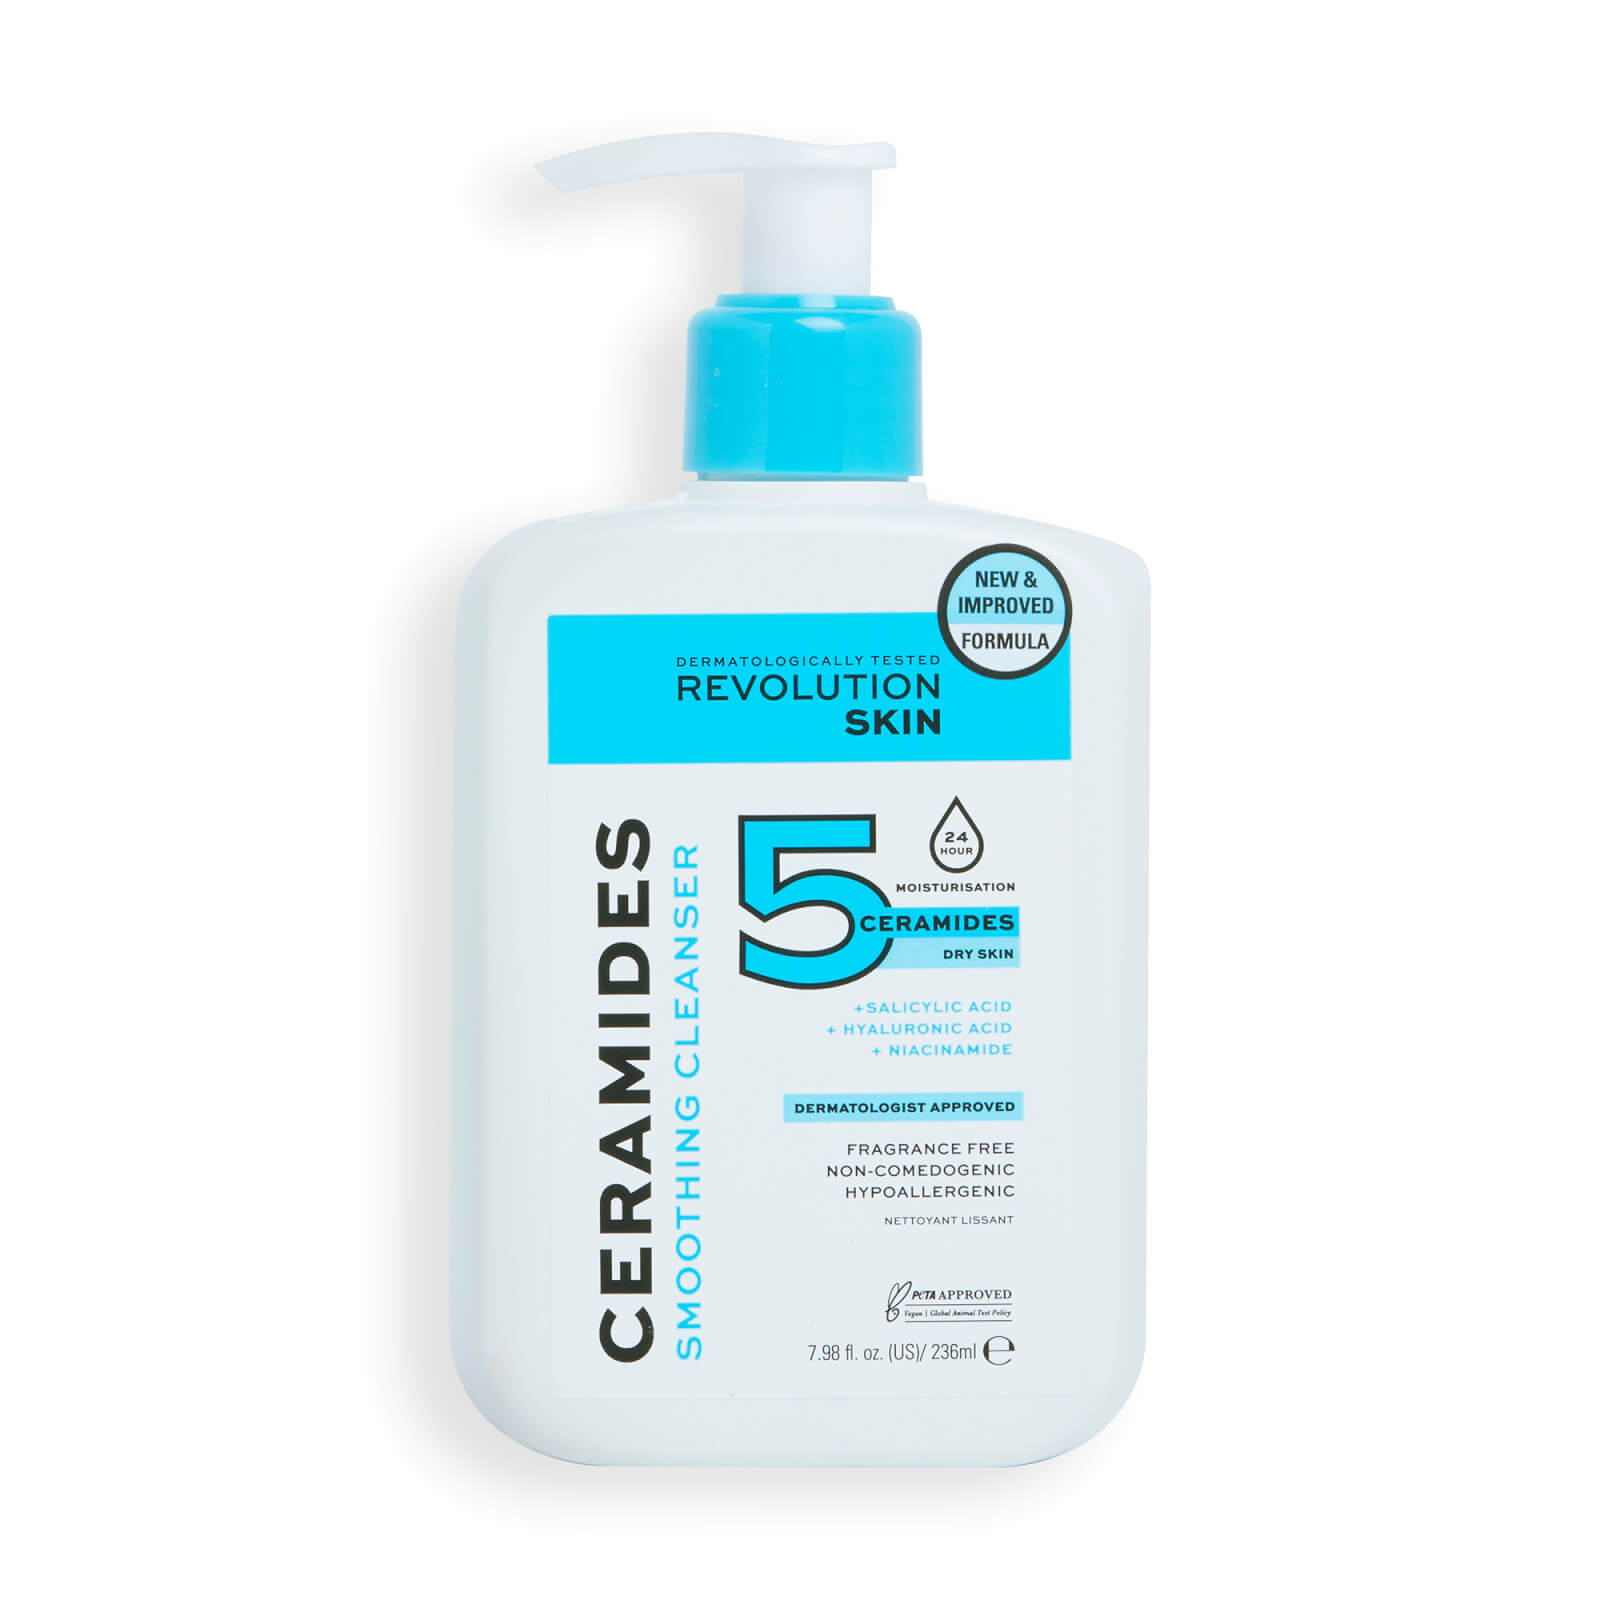 Photos - Facial / Body Cleansing Product Revolution Skincare Ceramides Soothing Cleanser 236ml 1692854 